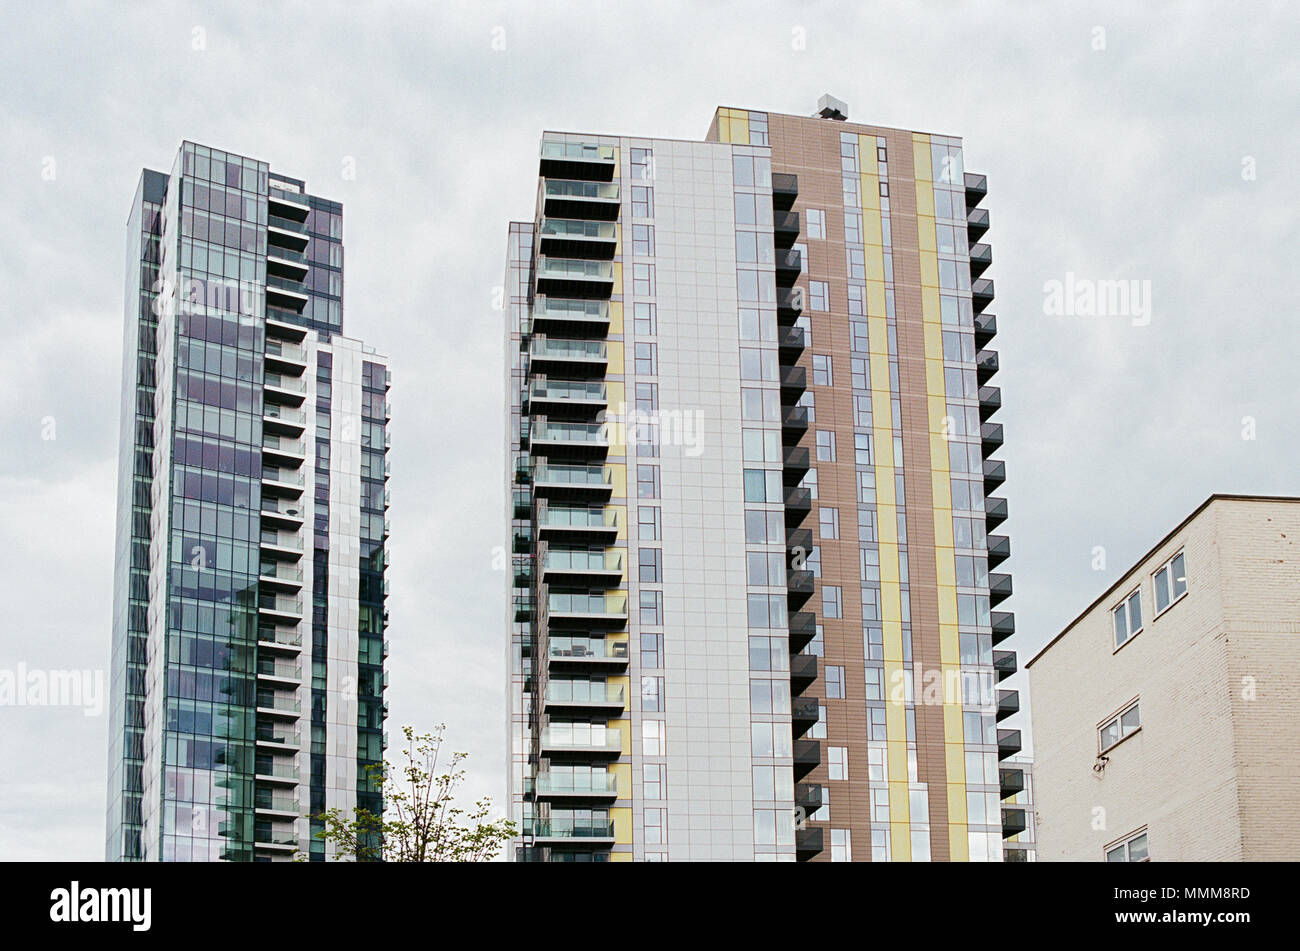 The new Skyline Apartments at Woodberry Down, off Seven Sisters Road, North London UK Stock Photo